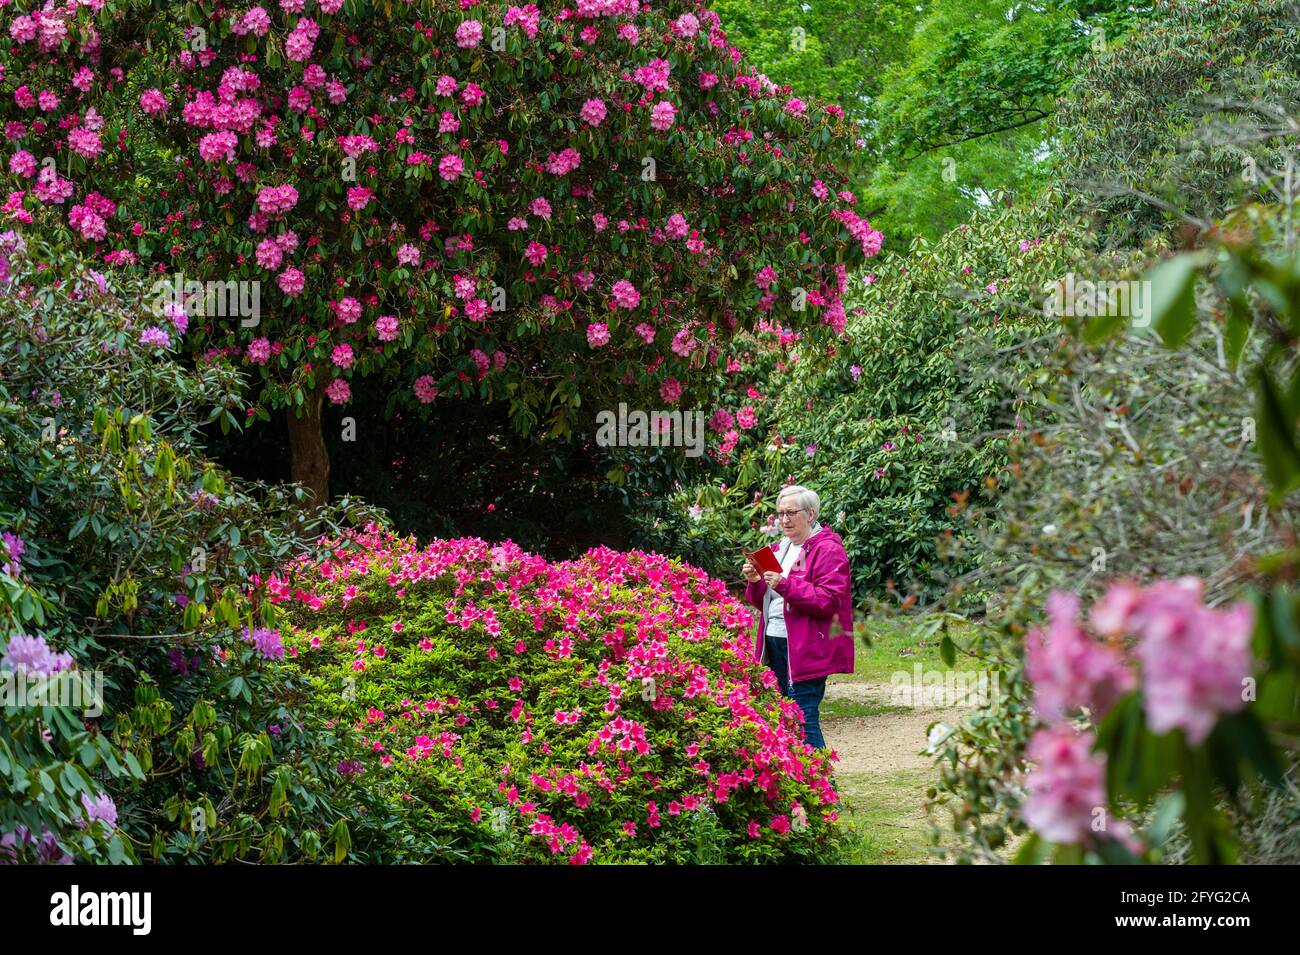 Iver, UK.  28 May 2021. UK Weather: A woman views the rhododendrons and azalea, currently in bloom, in the Temple Gardens at Langley Park in Iver, Buckinghamshire ahead of the Bank Holiday weekend, when temperatures are expected to rise above 20C.  Langley Park is a former royal hunting ground with links back to King Henry VIII, Queen Elizabeth I and Queen Victoria.   Credit: Stephen Chung / Alamy Live News Stock Photo